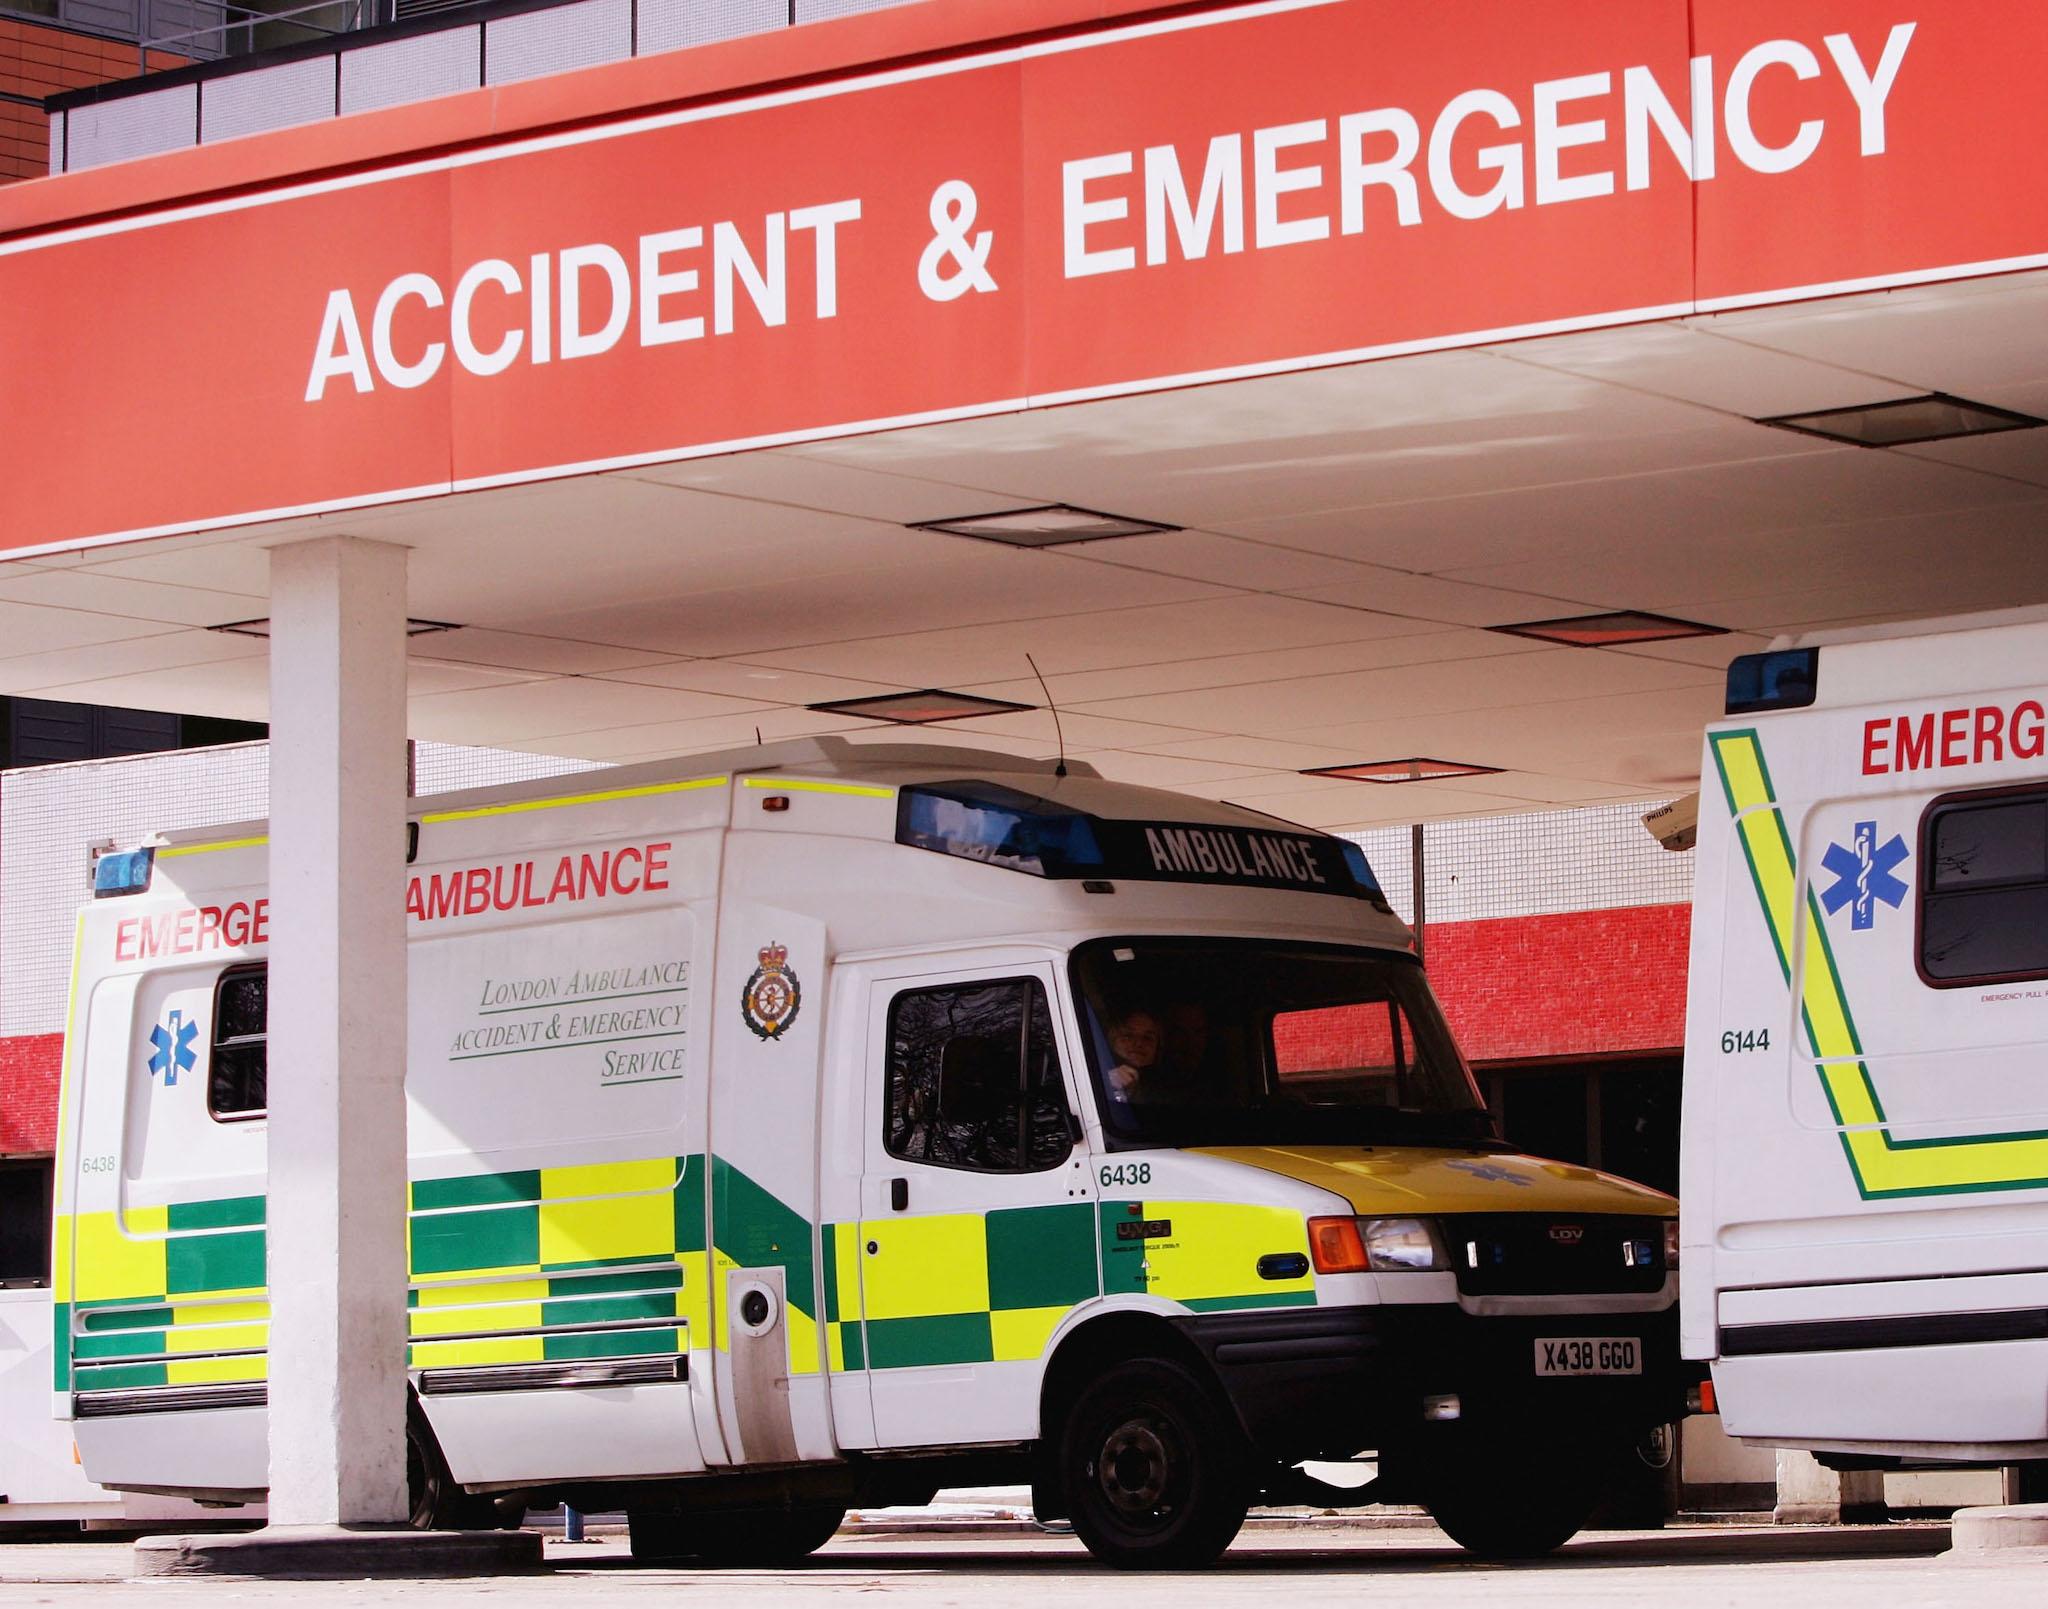 Ambulances are seen at the Accident and Emergency department of St. Thomas' Hospital